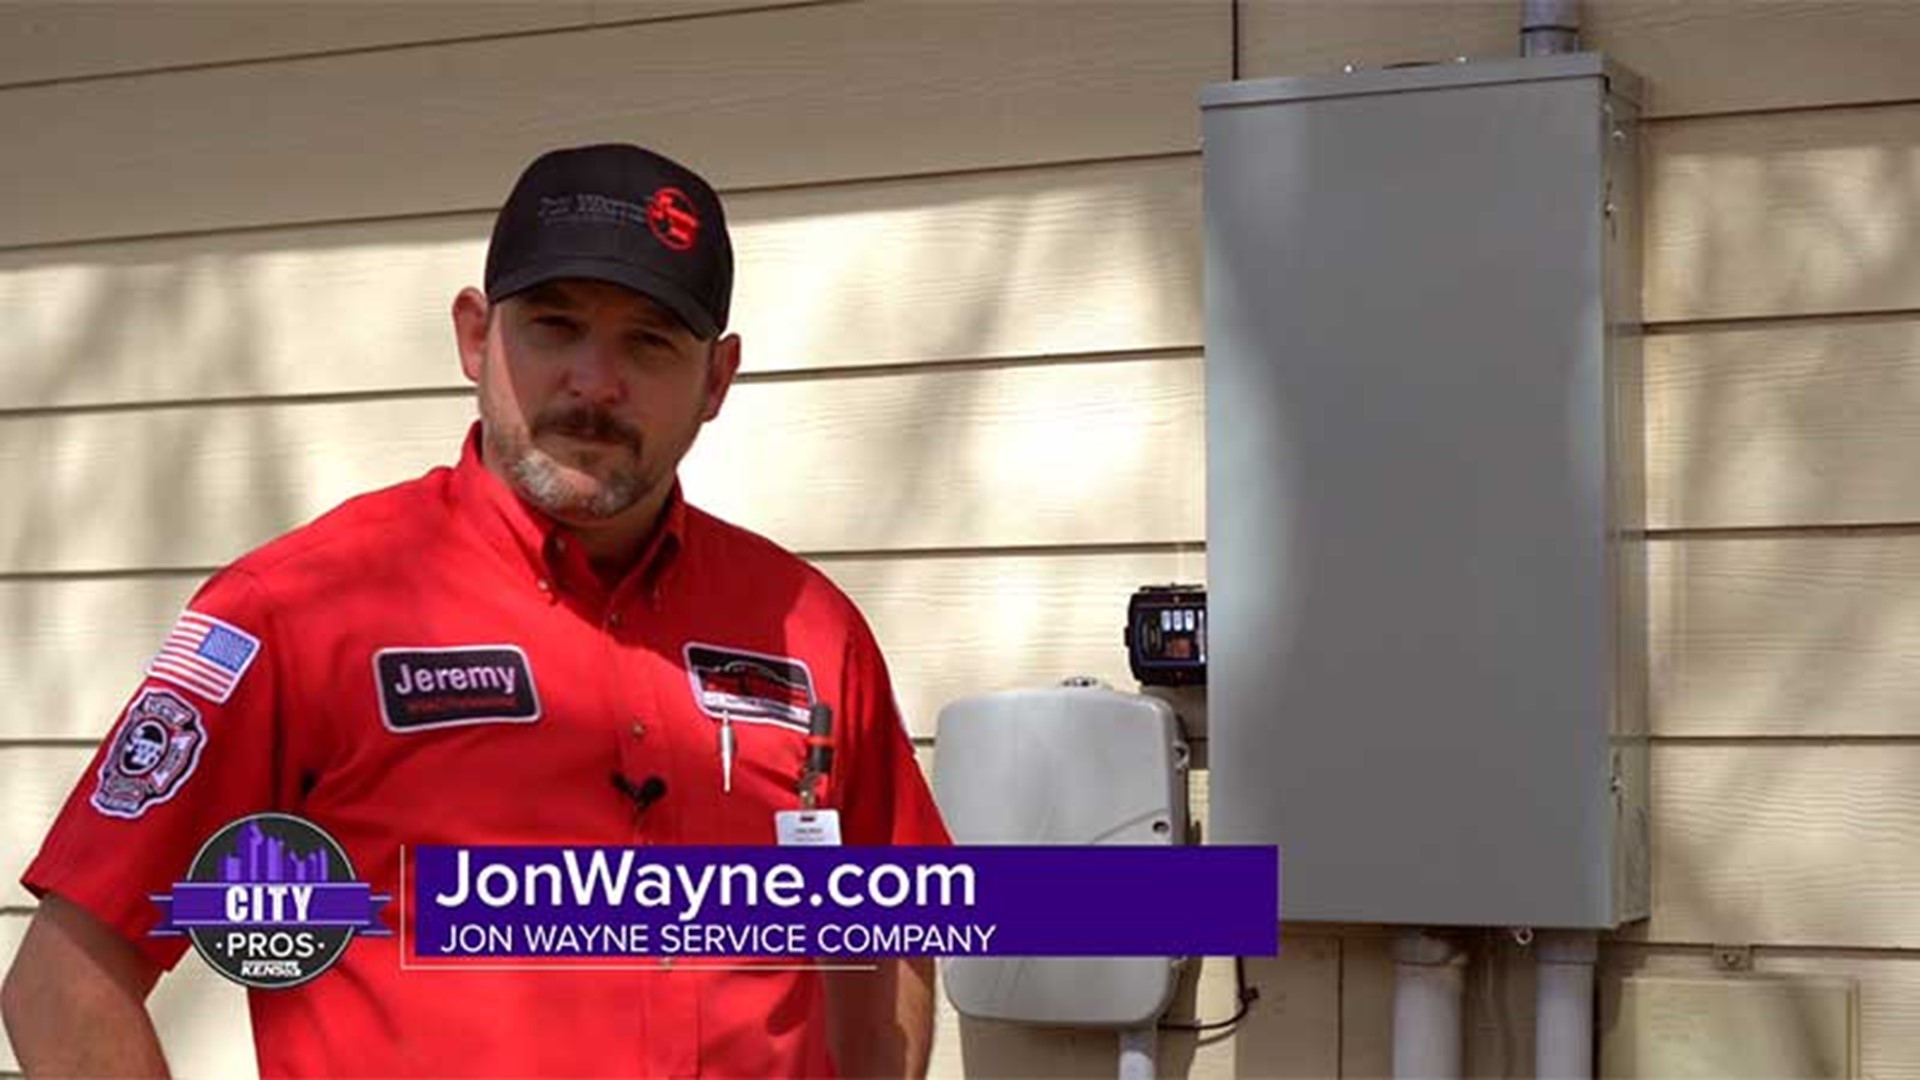 A Jon Wayne service technician will safely open up your main electrical panel to check for corrosion, overheating breakers and loose connections.